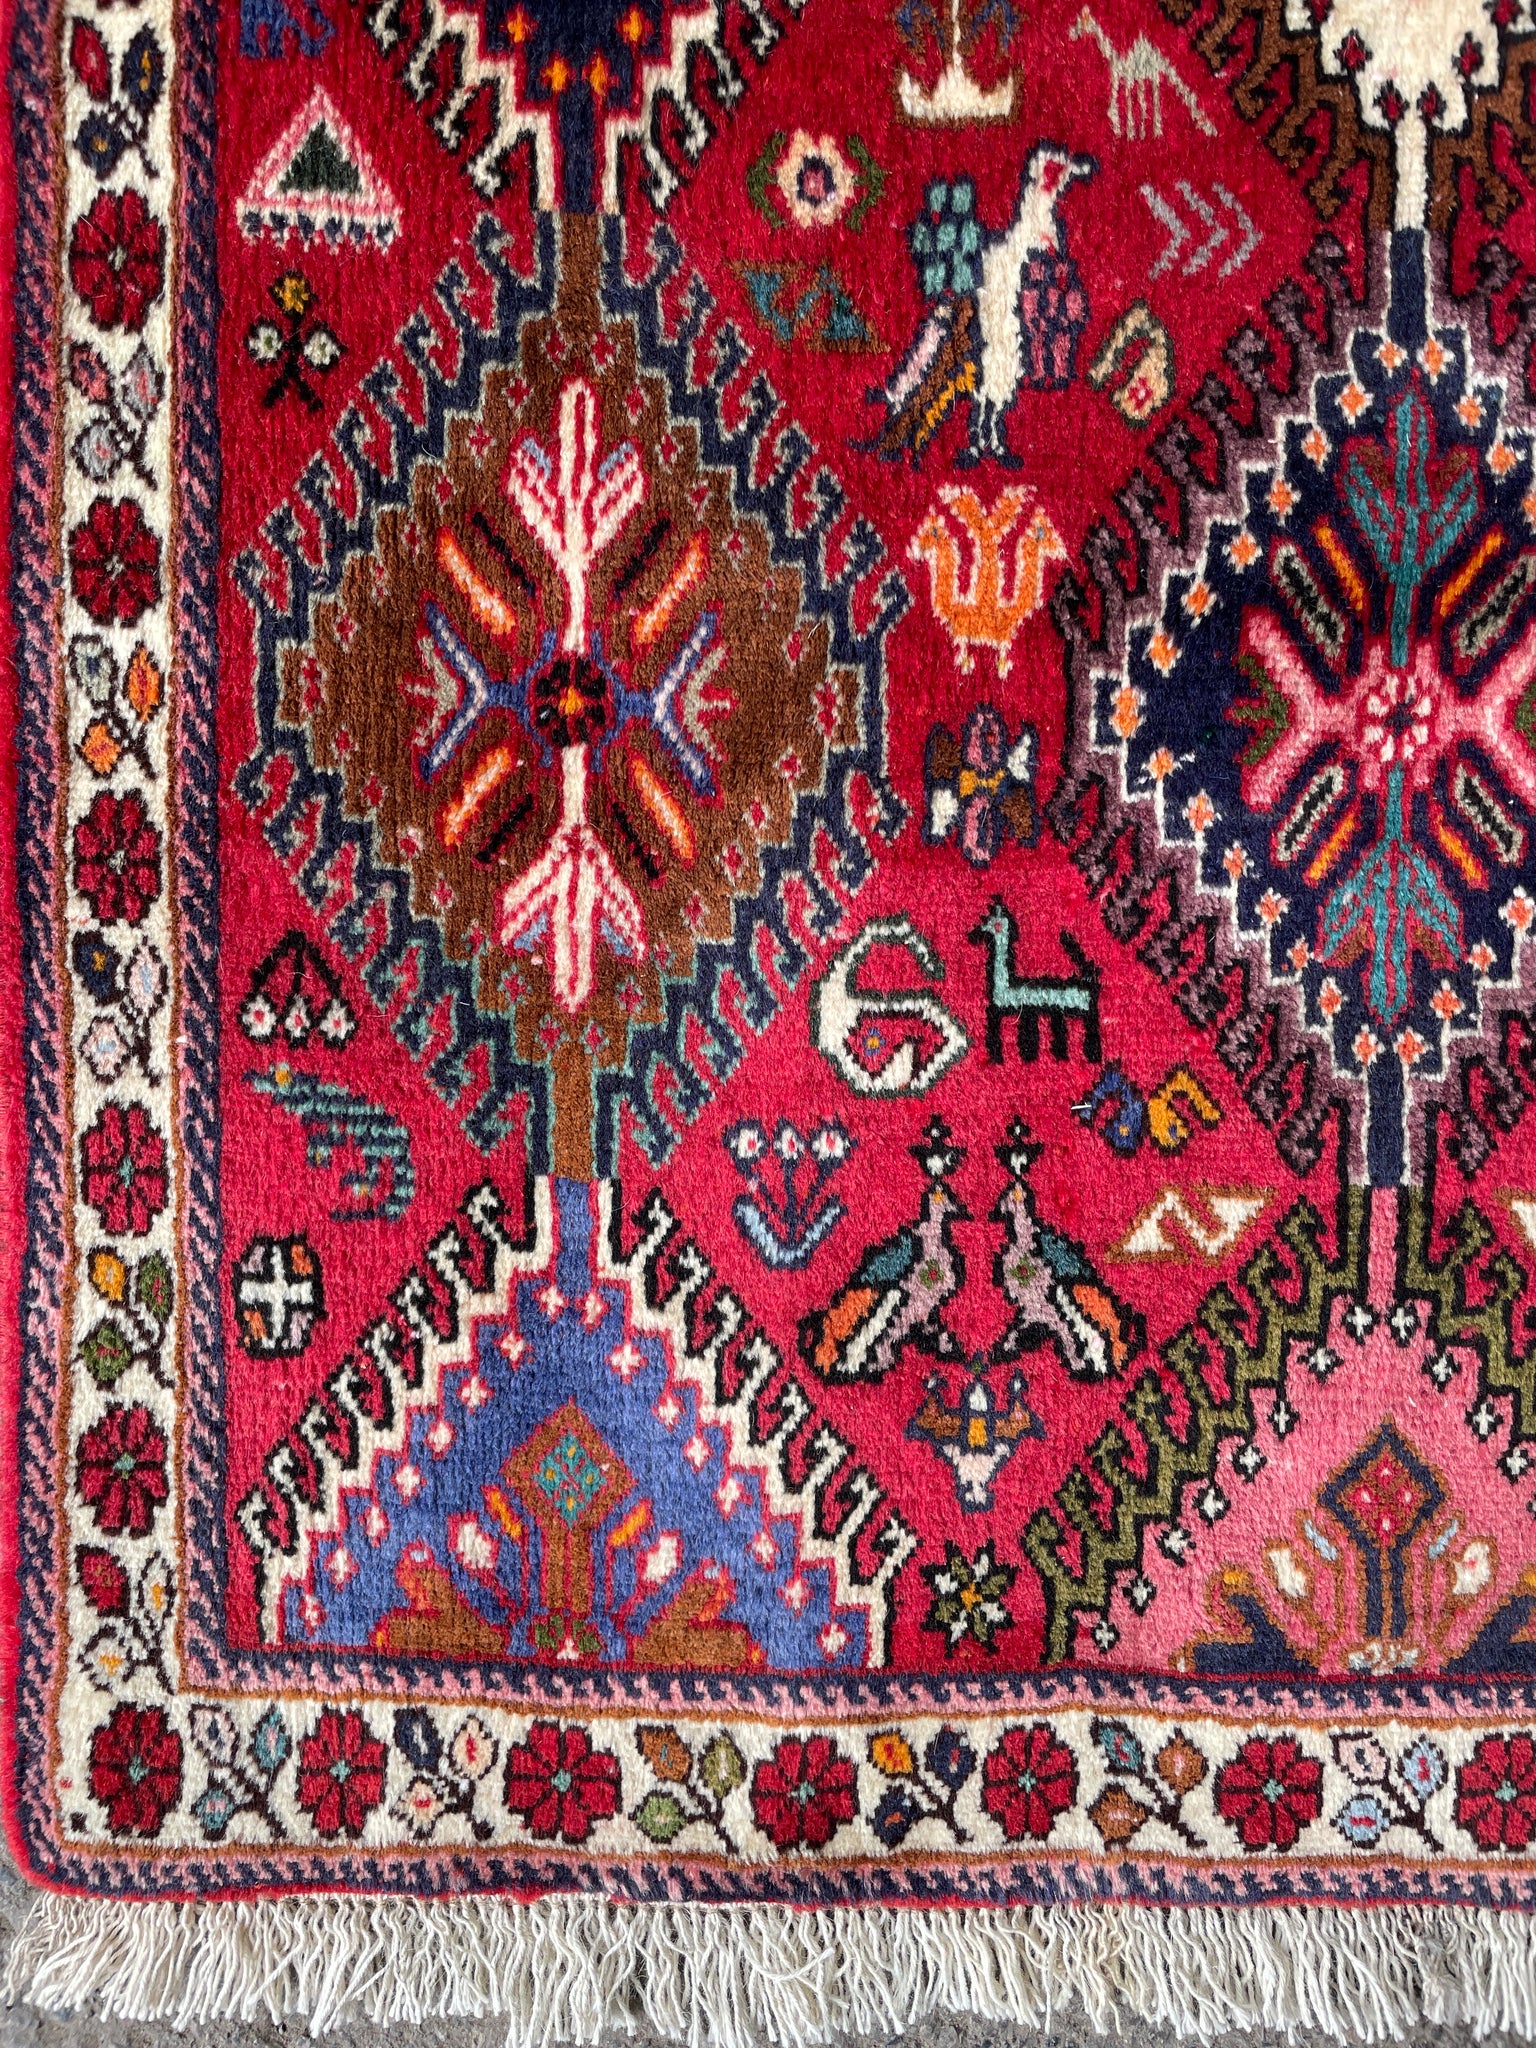 Vintage shiraz rug ⑲ | ziwanipoultry.com